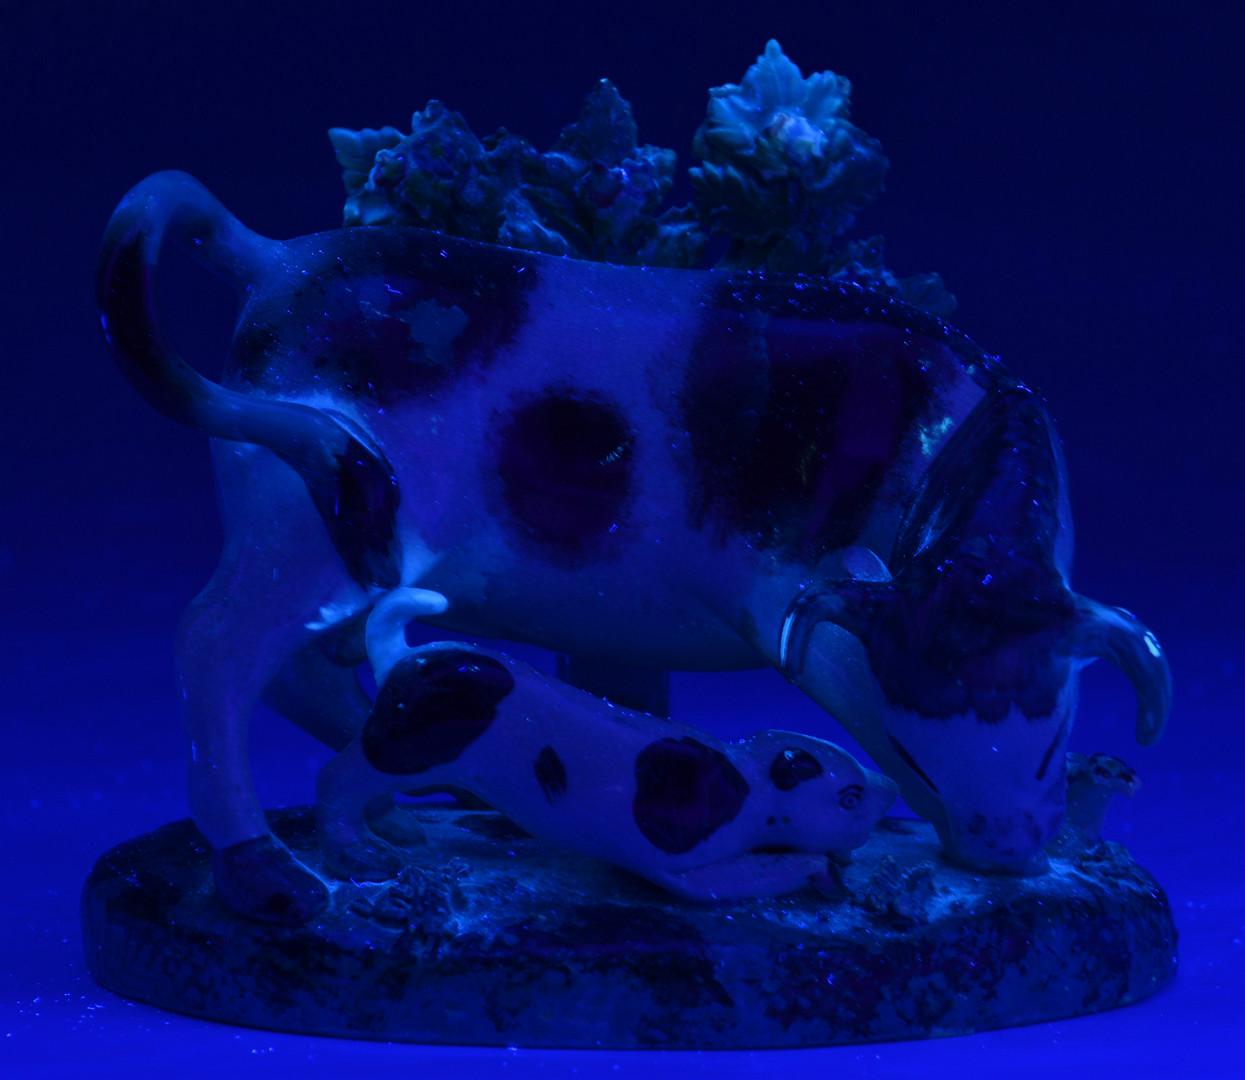 Lot 559: Staffordshire group: Bull Baiting